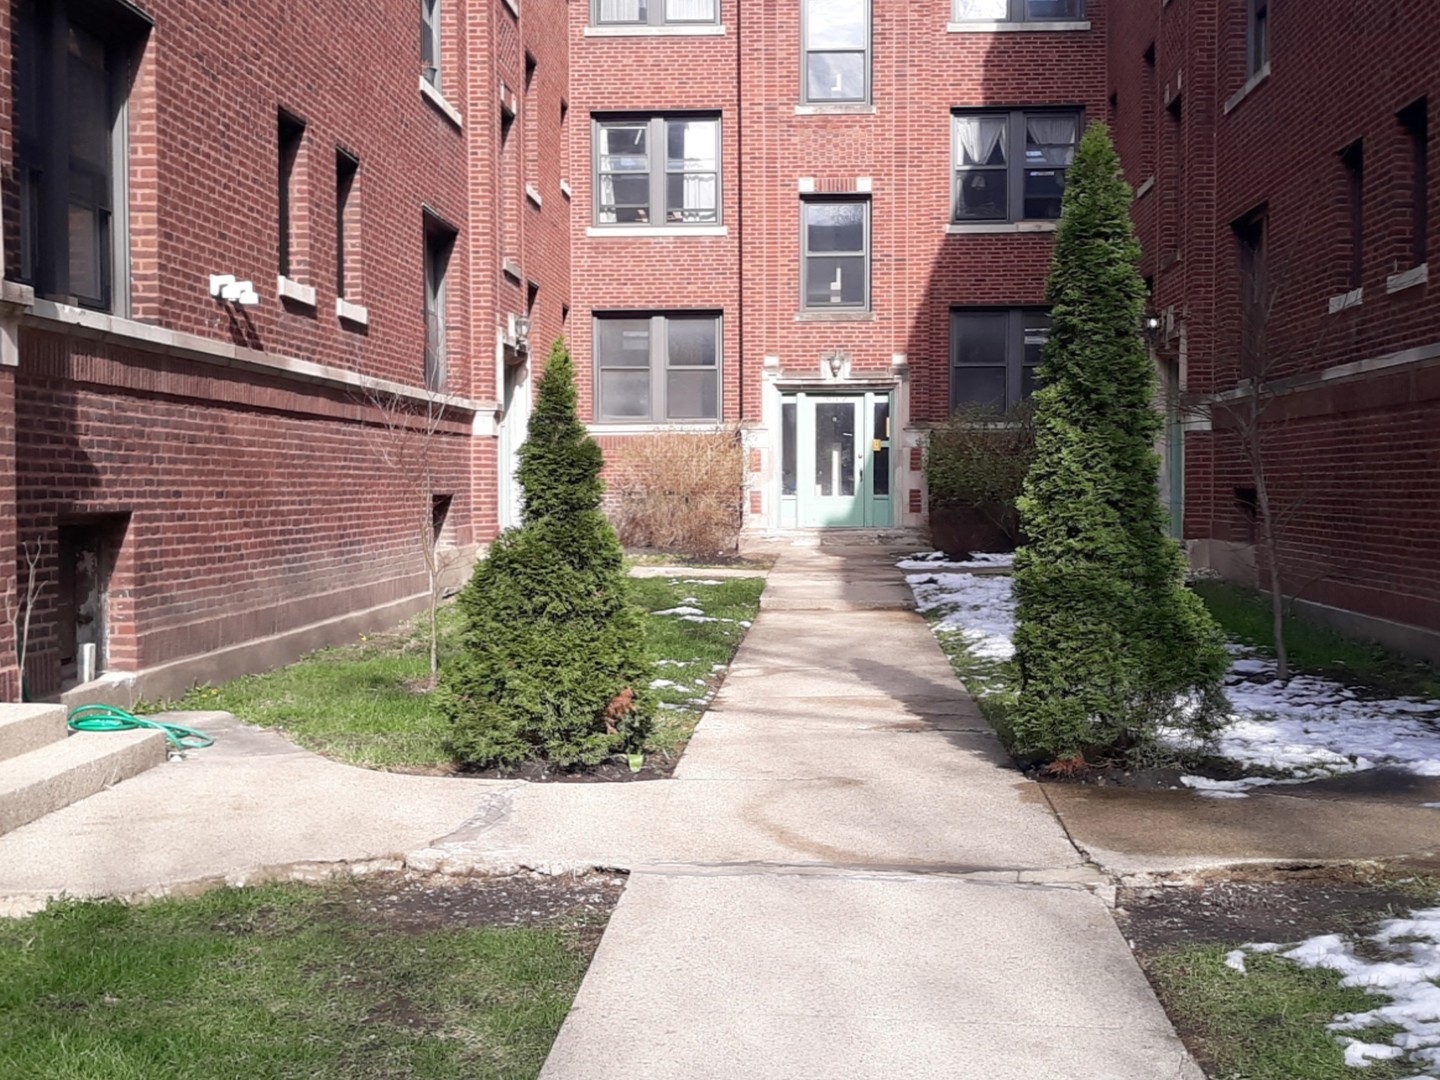 a view of a pathway both side of building